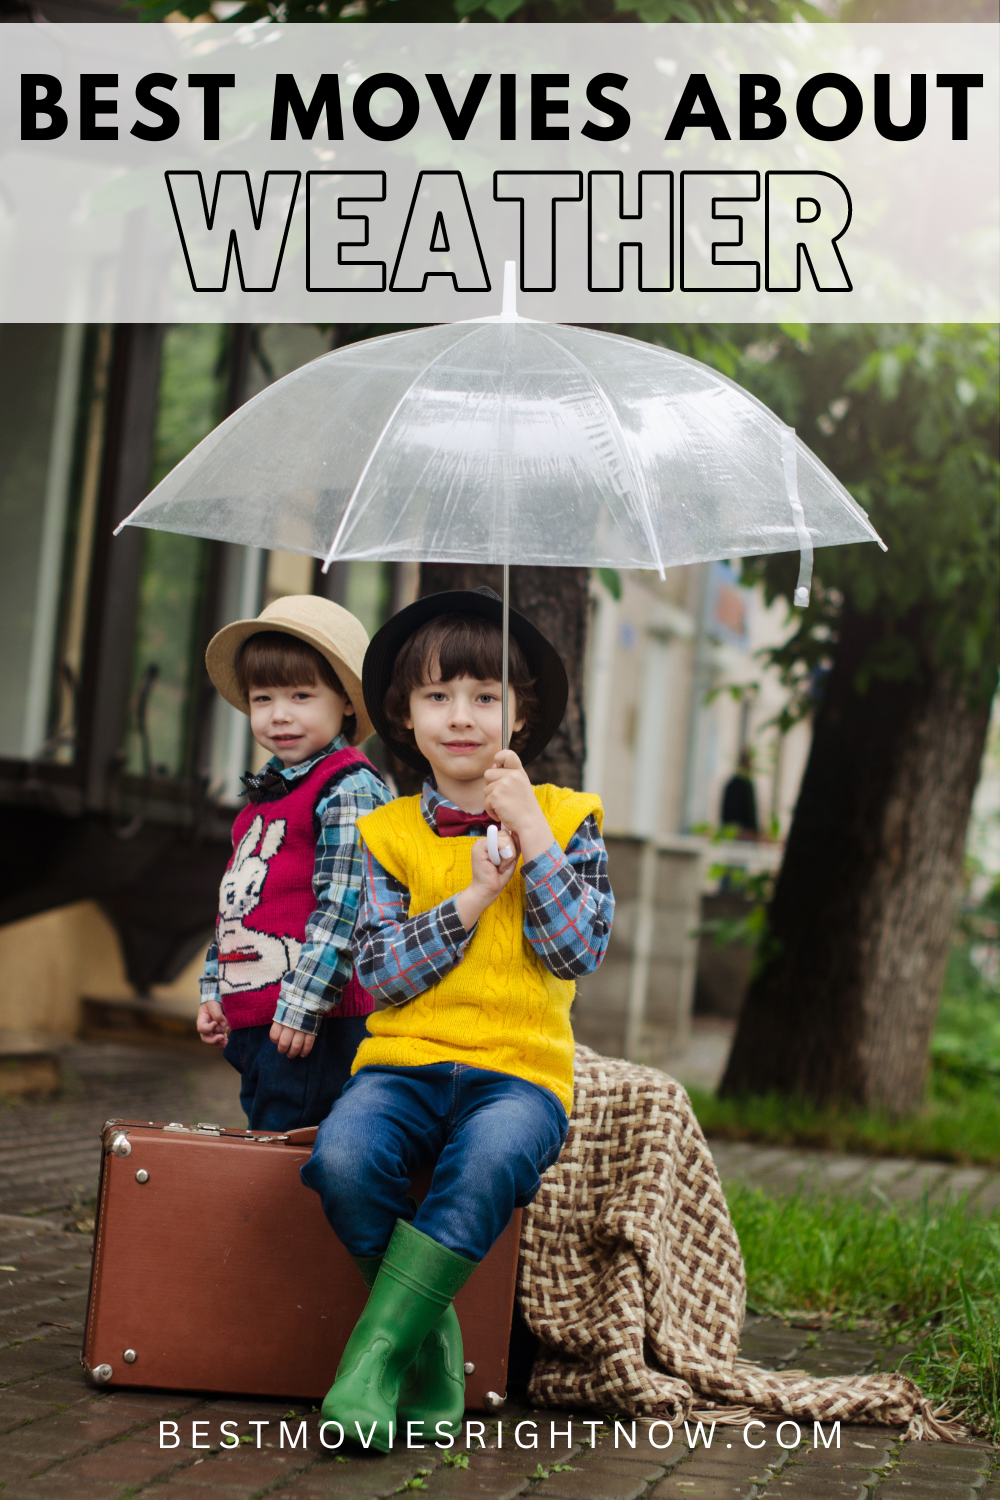 a picture of two kids holding an umbrella on a rainy day with caption 